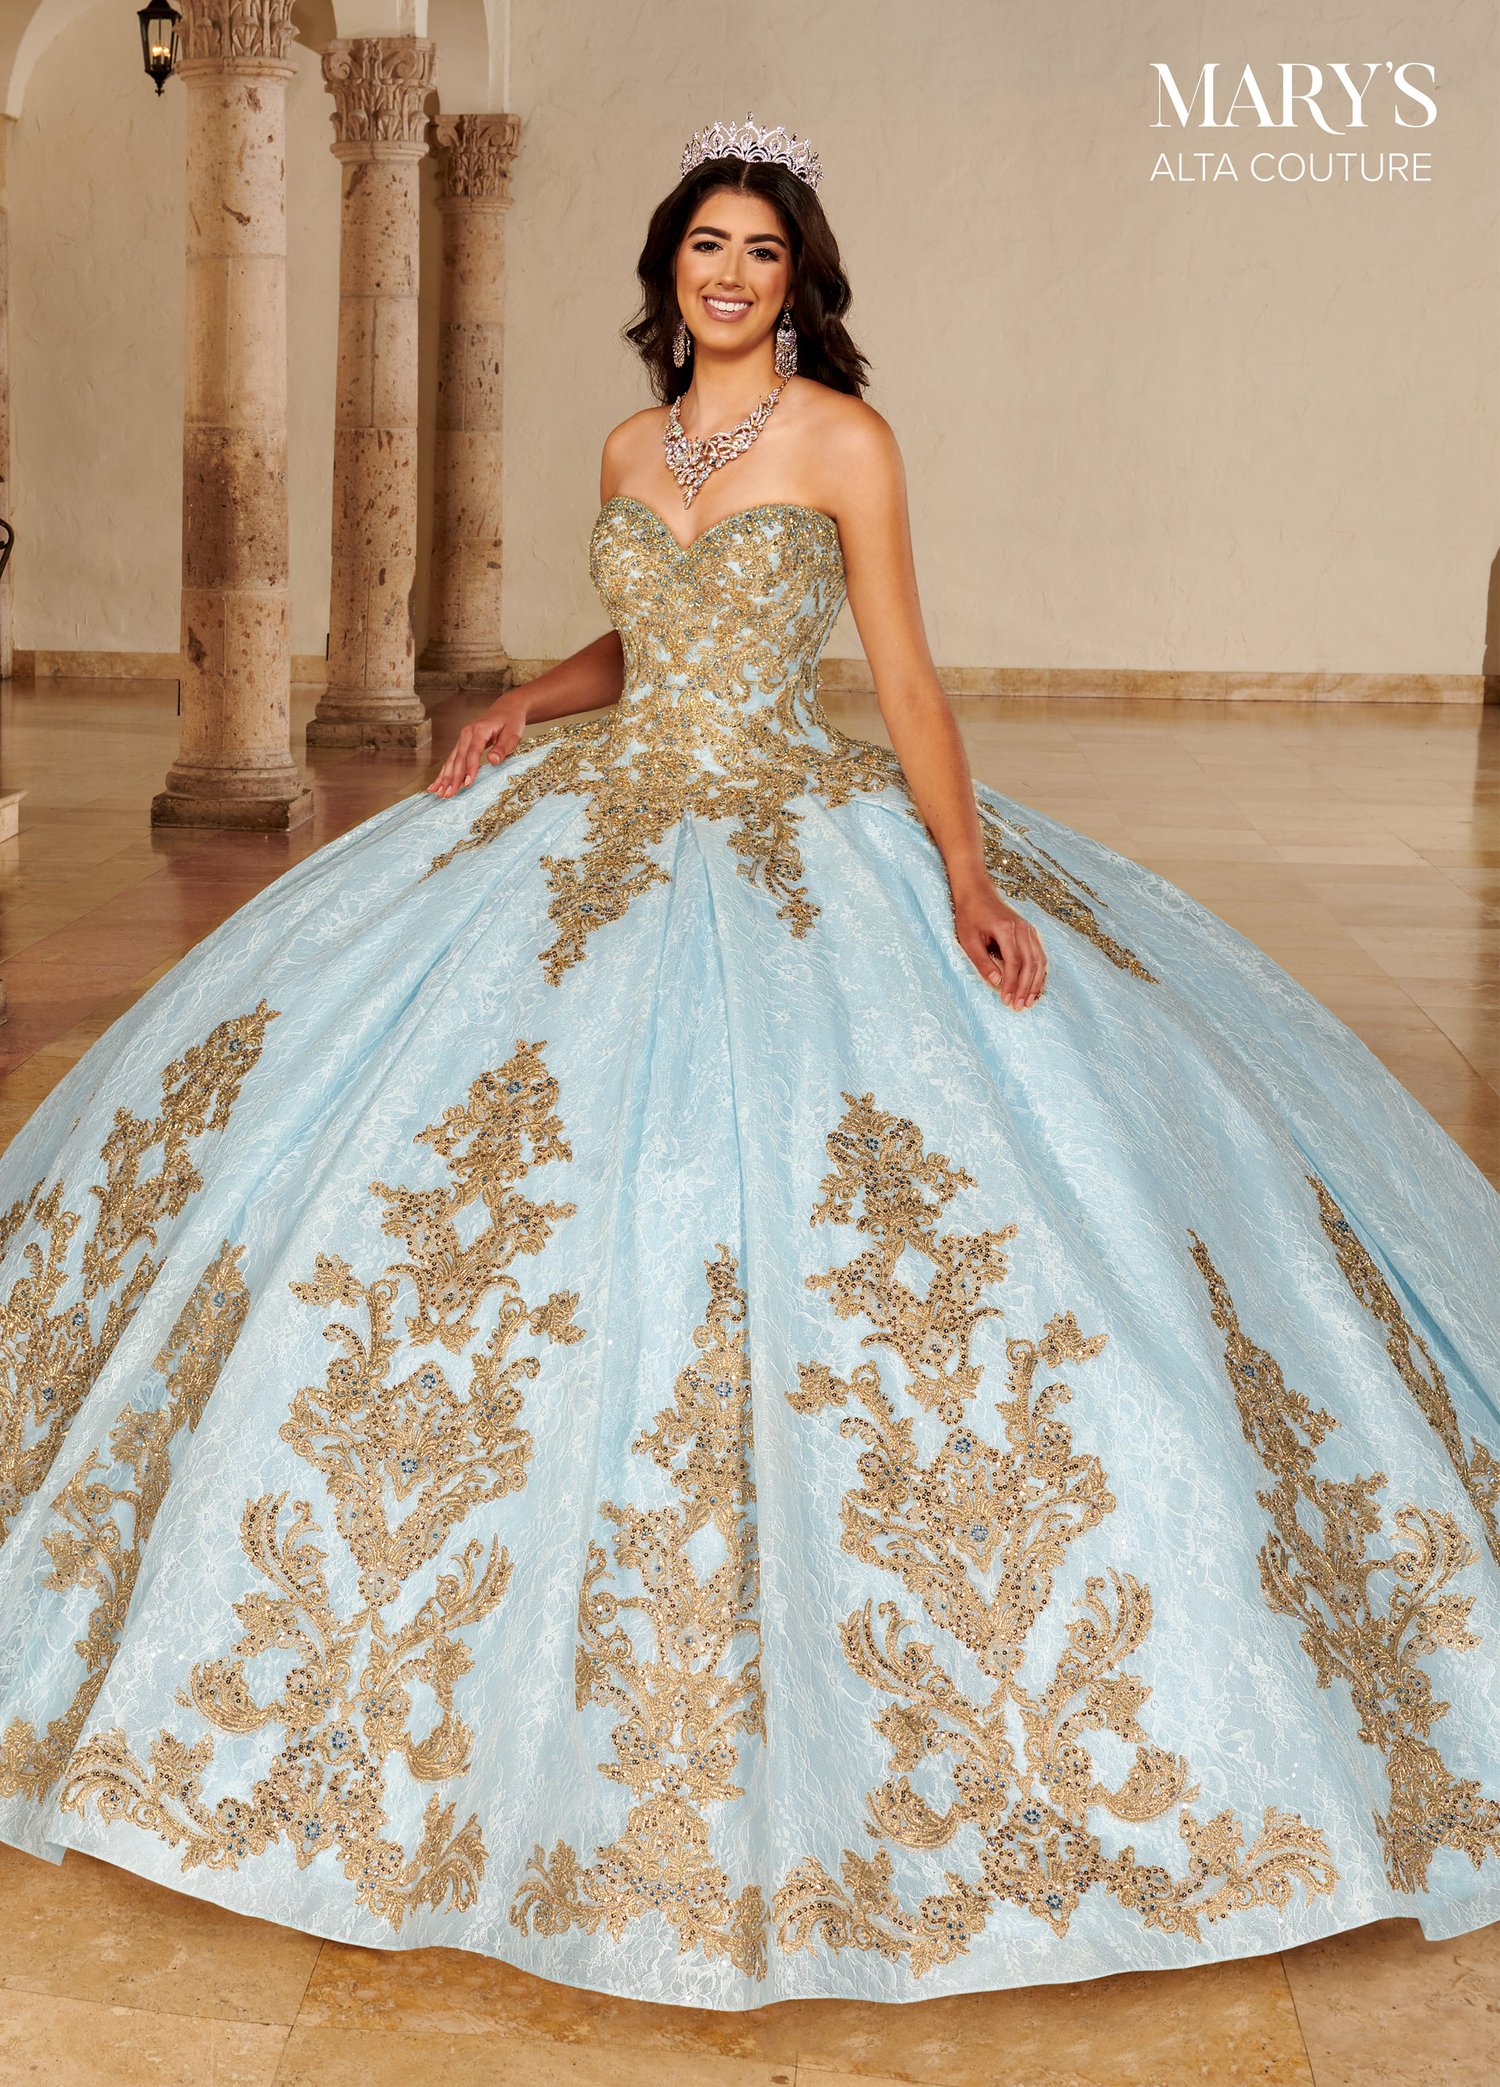 Sky Blue Lace and White Tulle Long Train Formal Gown - VQ